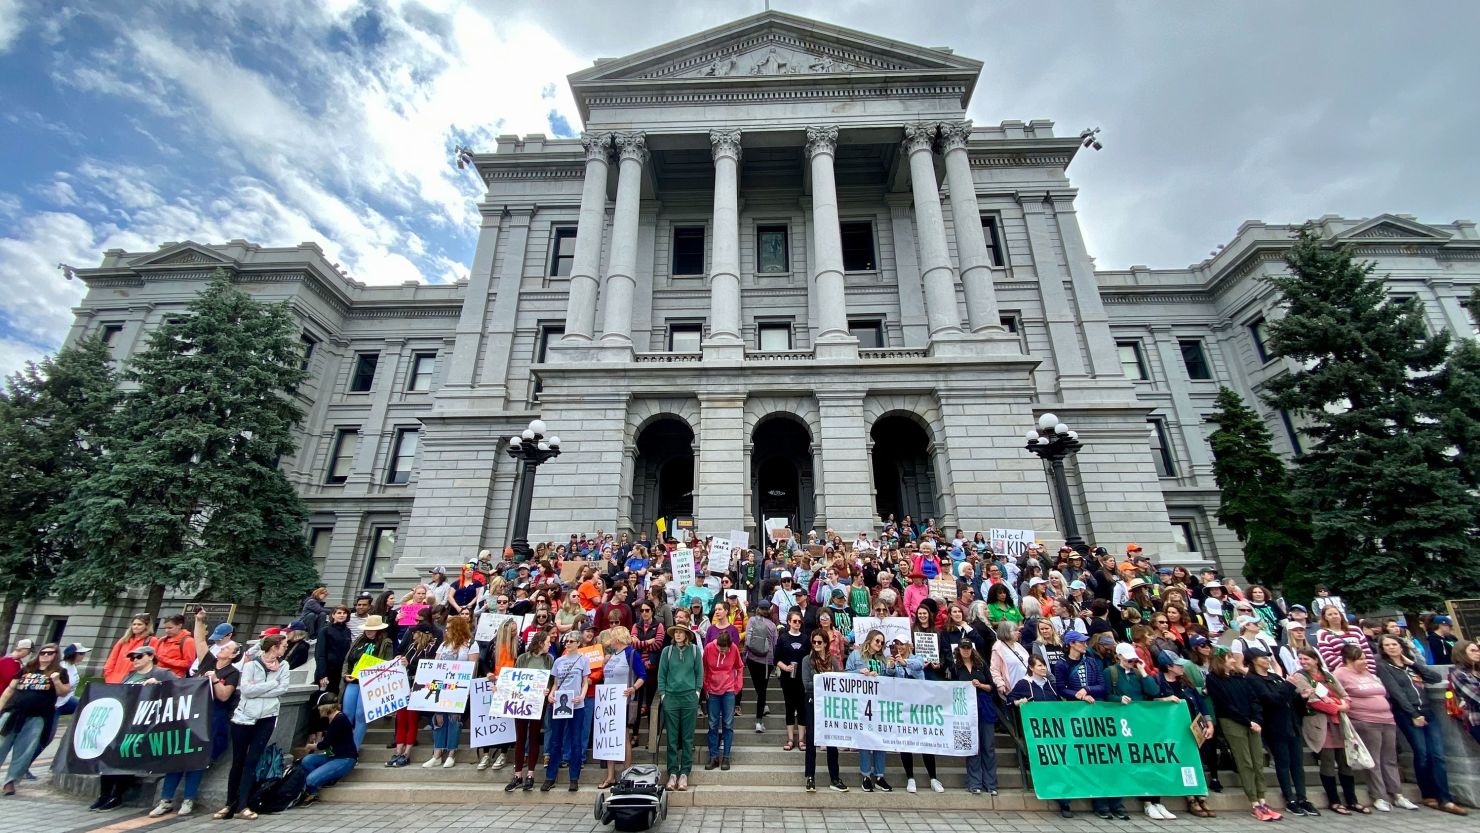 Protesters stage a sit-in at the Capitol building in Denver.